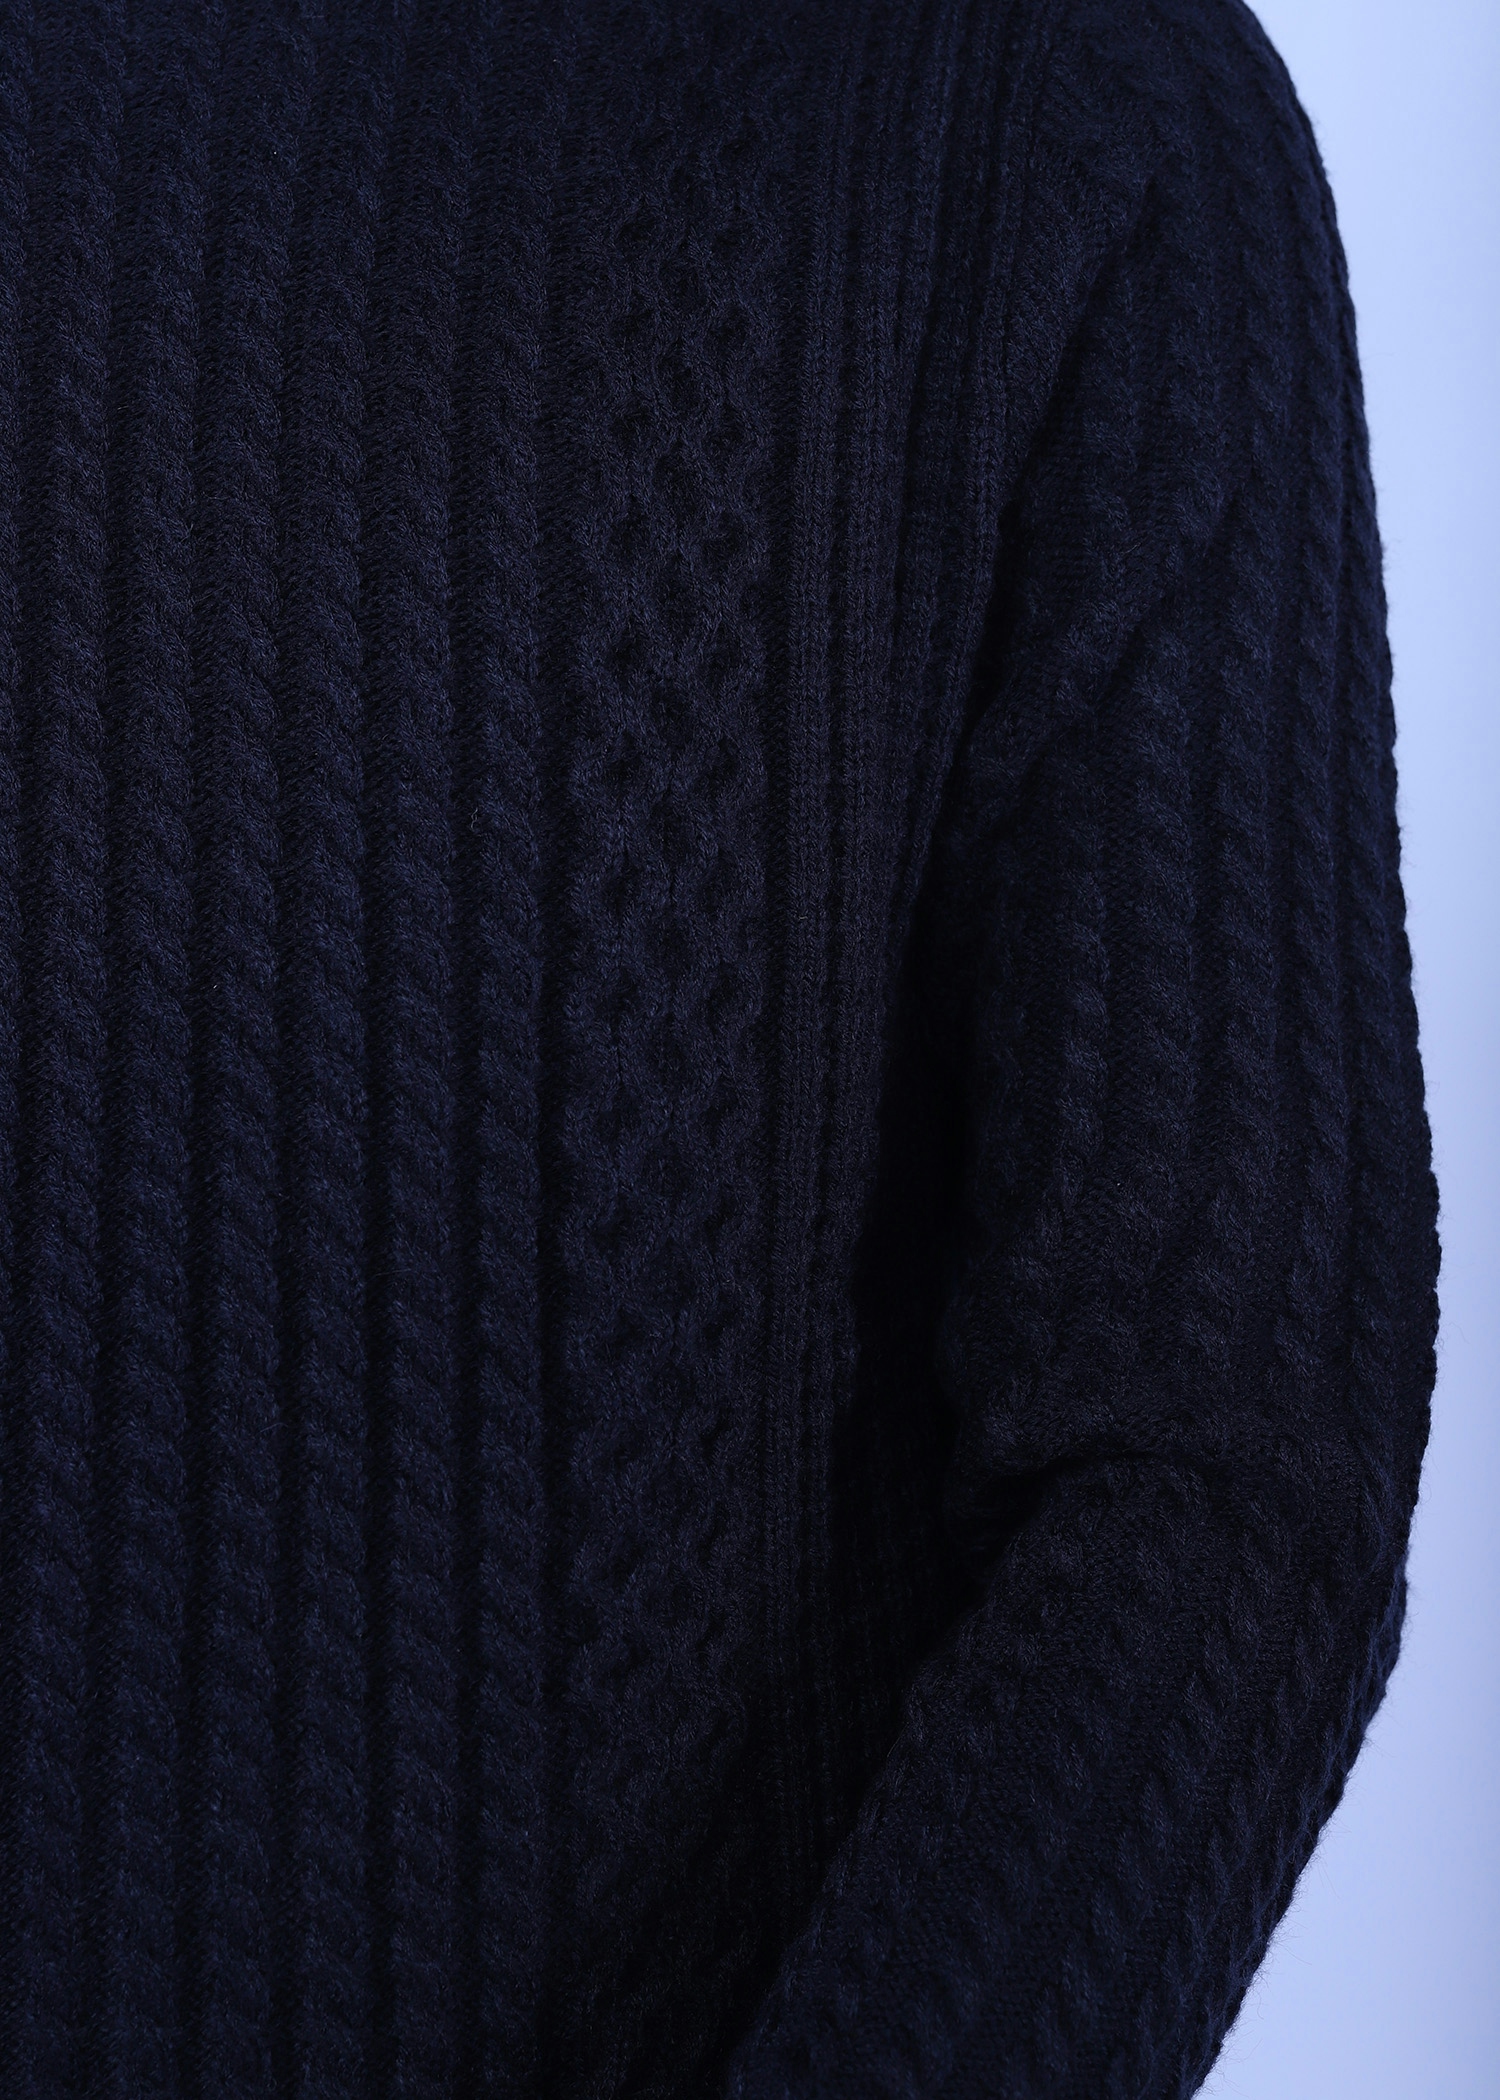 hillstar viii sweater navy color close front view